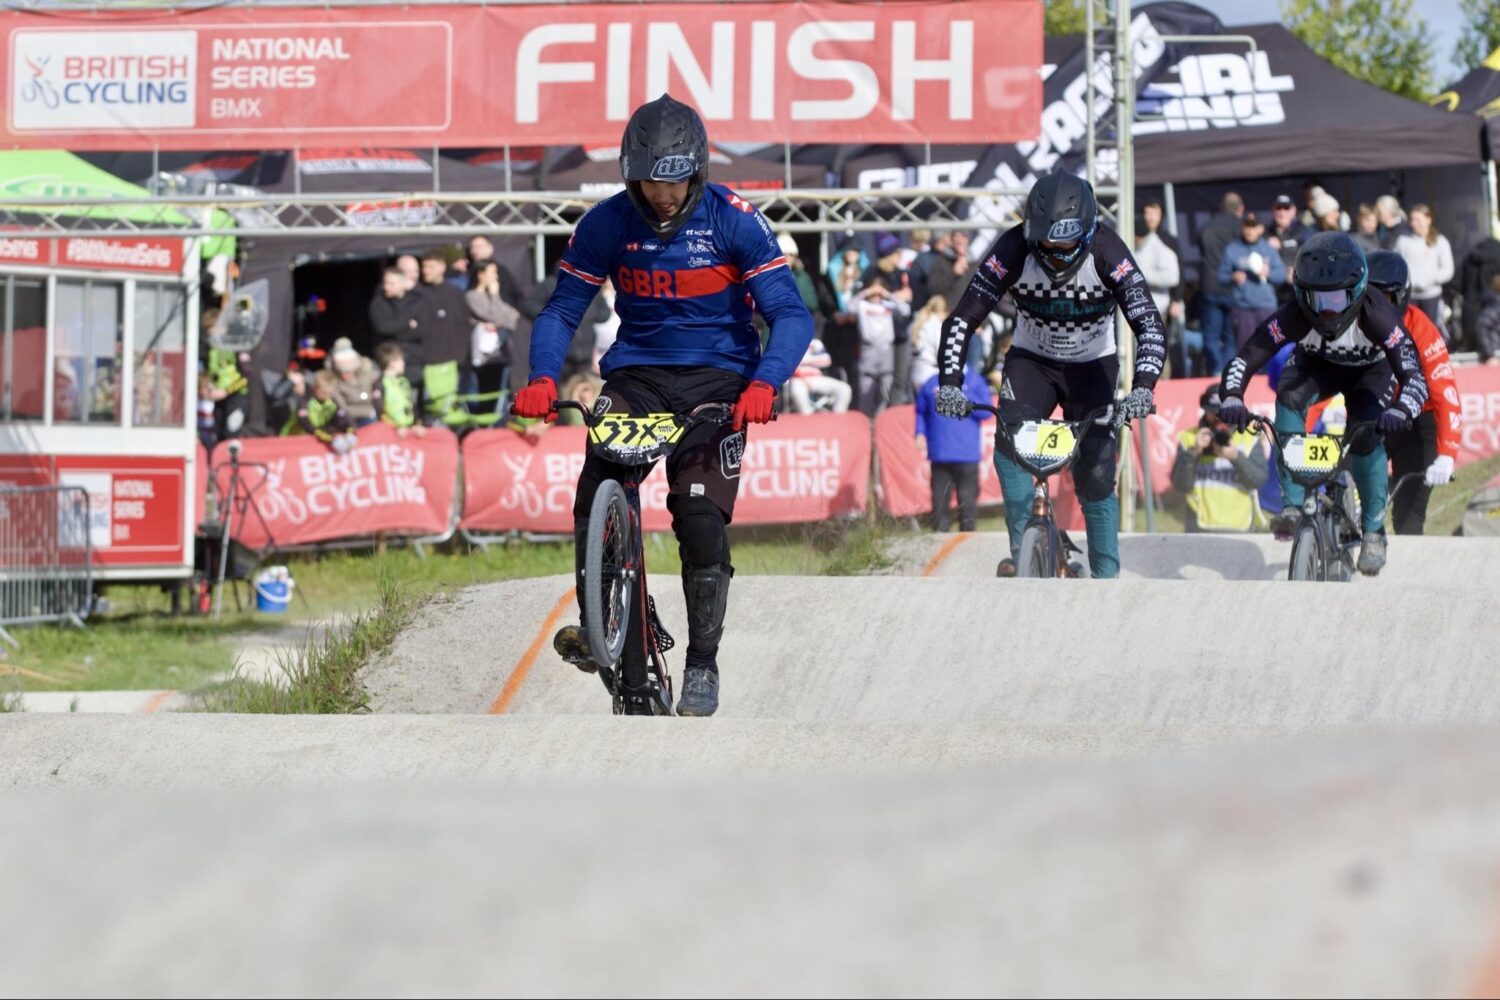 A young man is seen leading the way on his BMX bicycle during a race in the National BMX Championships.